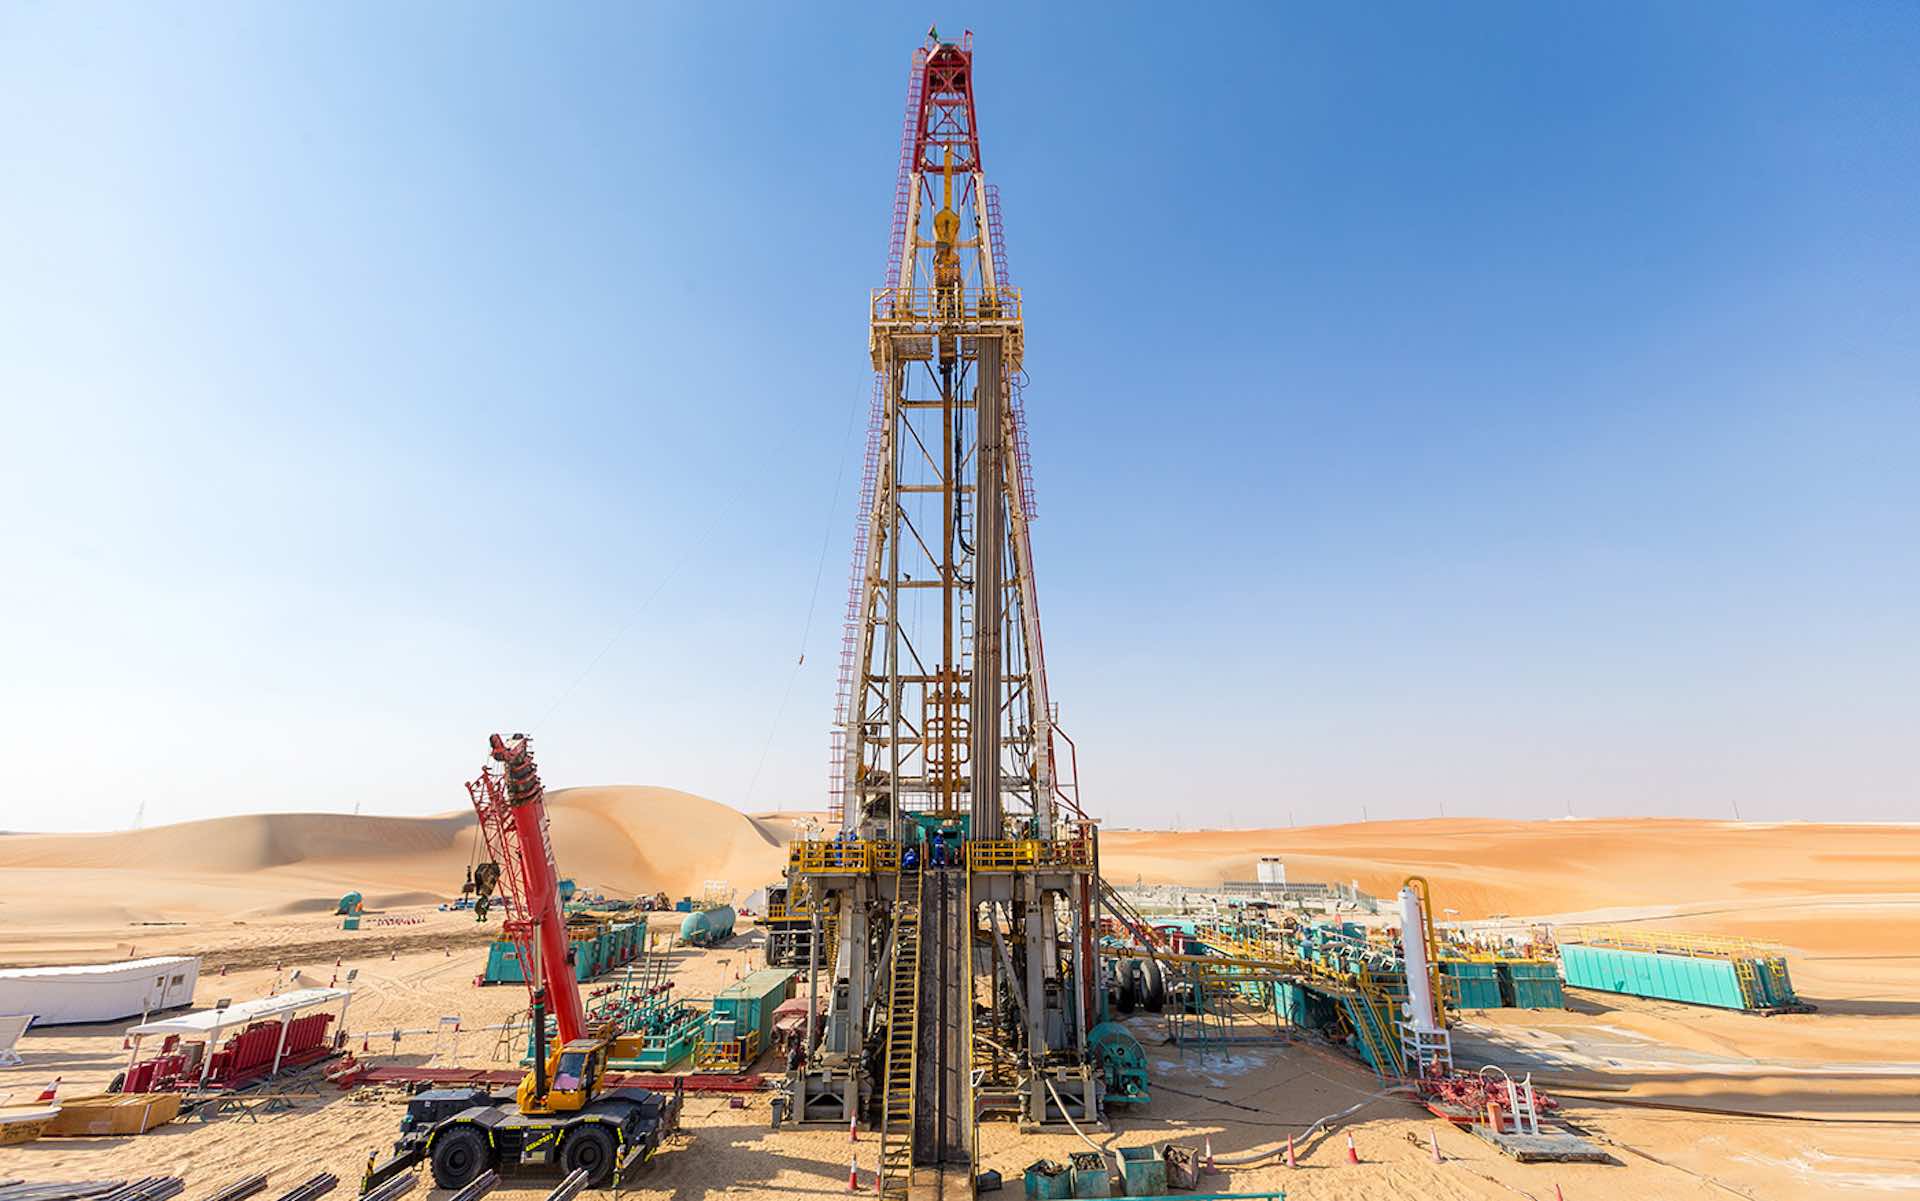 Drilling fluids services contract awarded to ADNOC Drilling for $1.6 billion